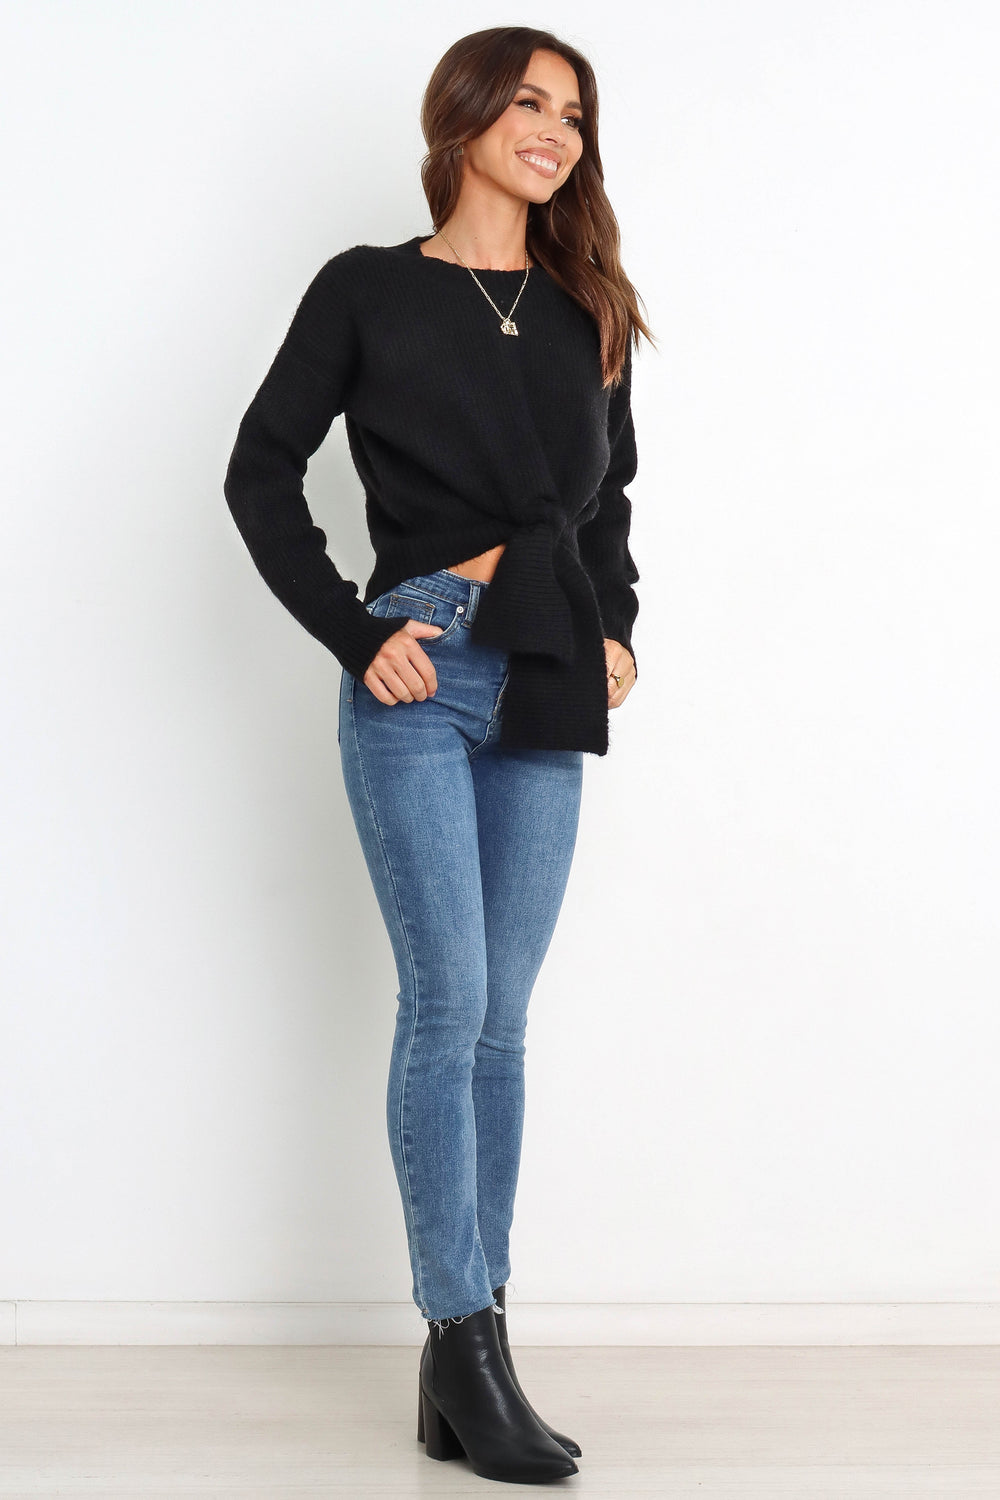 Petal and Pup USA KNITWEAR Captivate Knit Sweater - Black